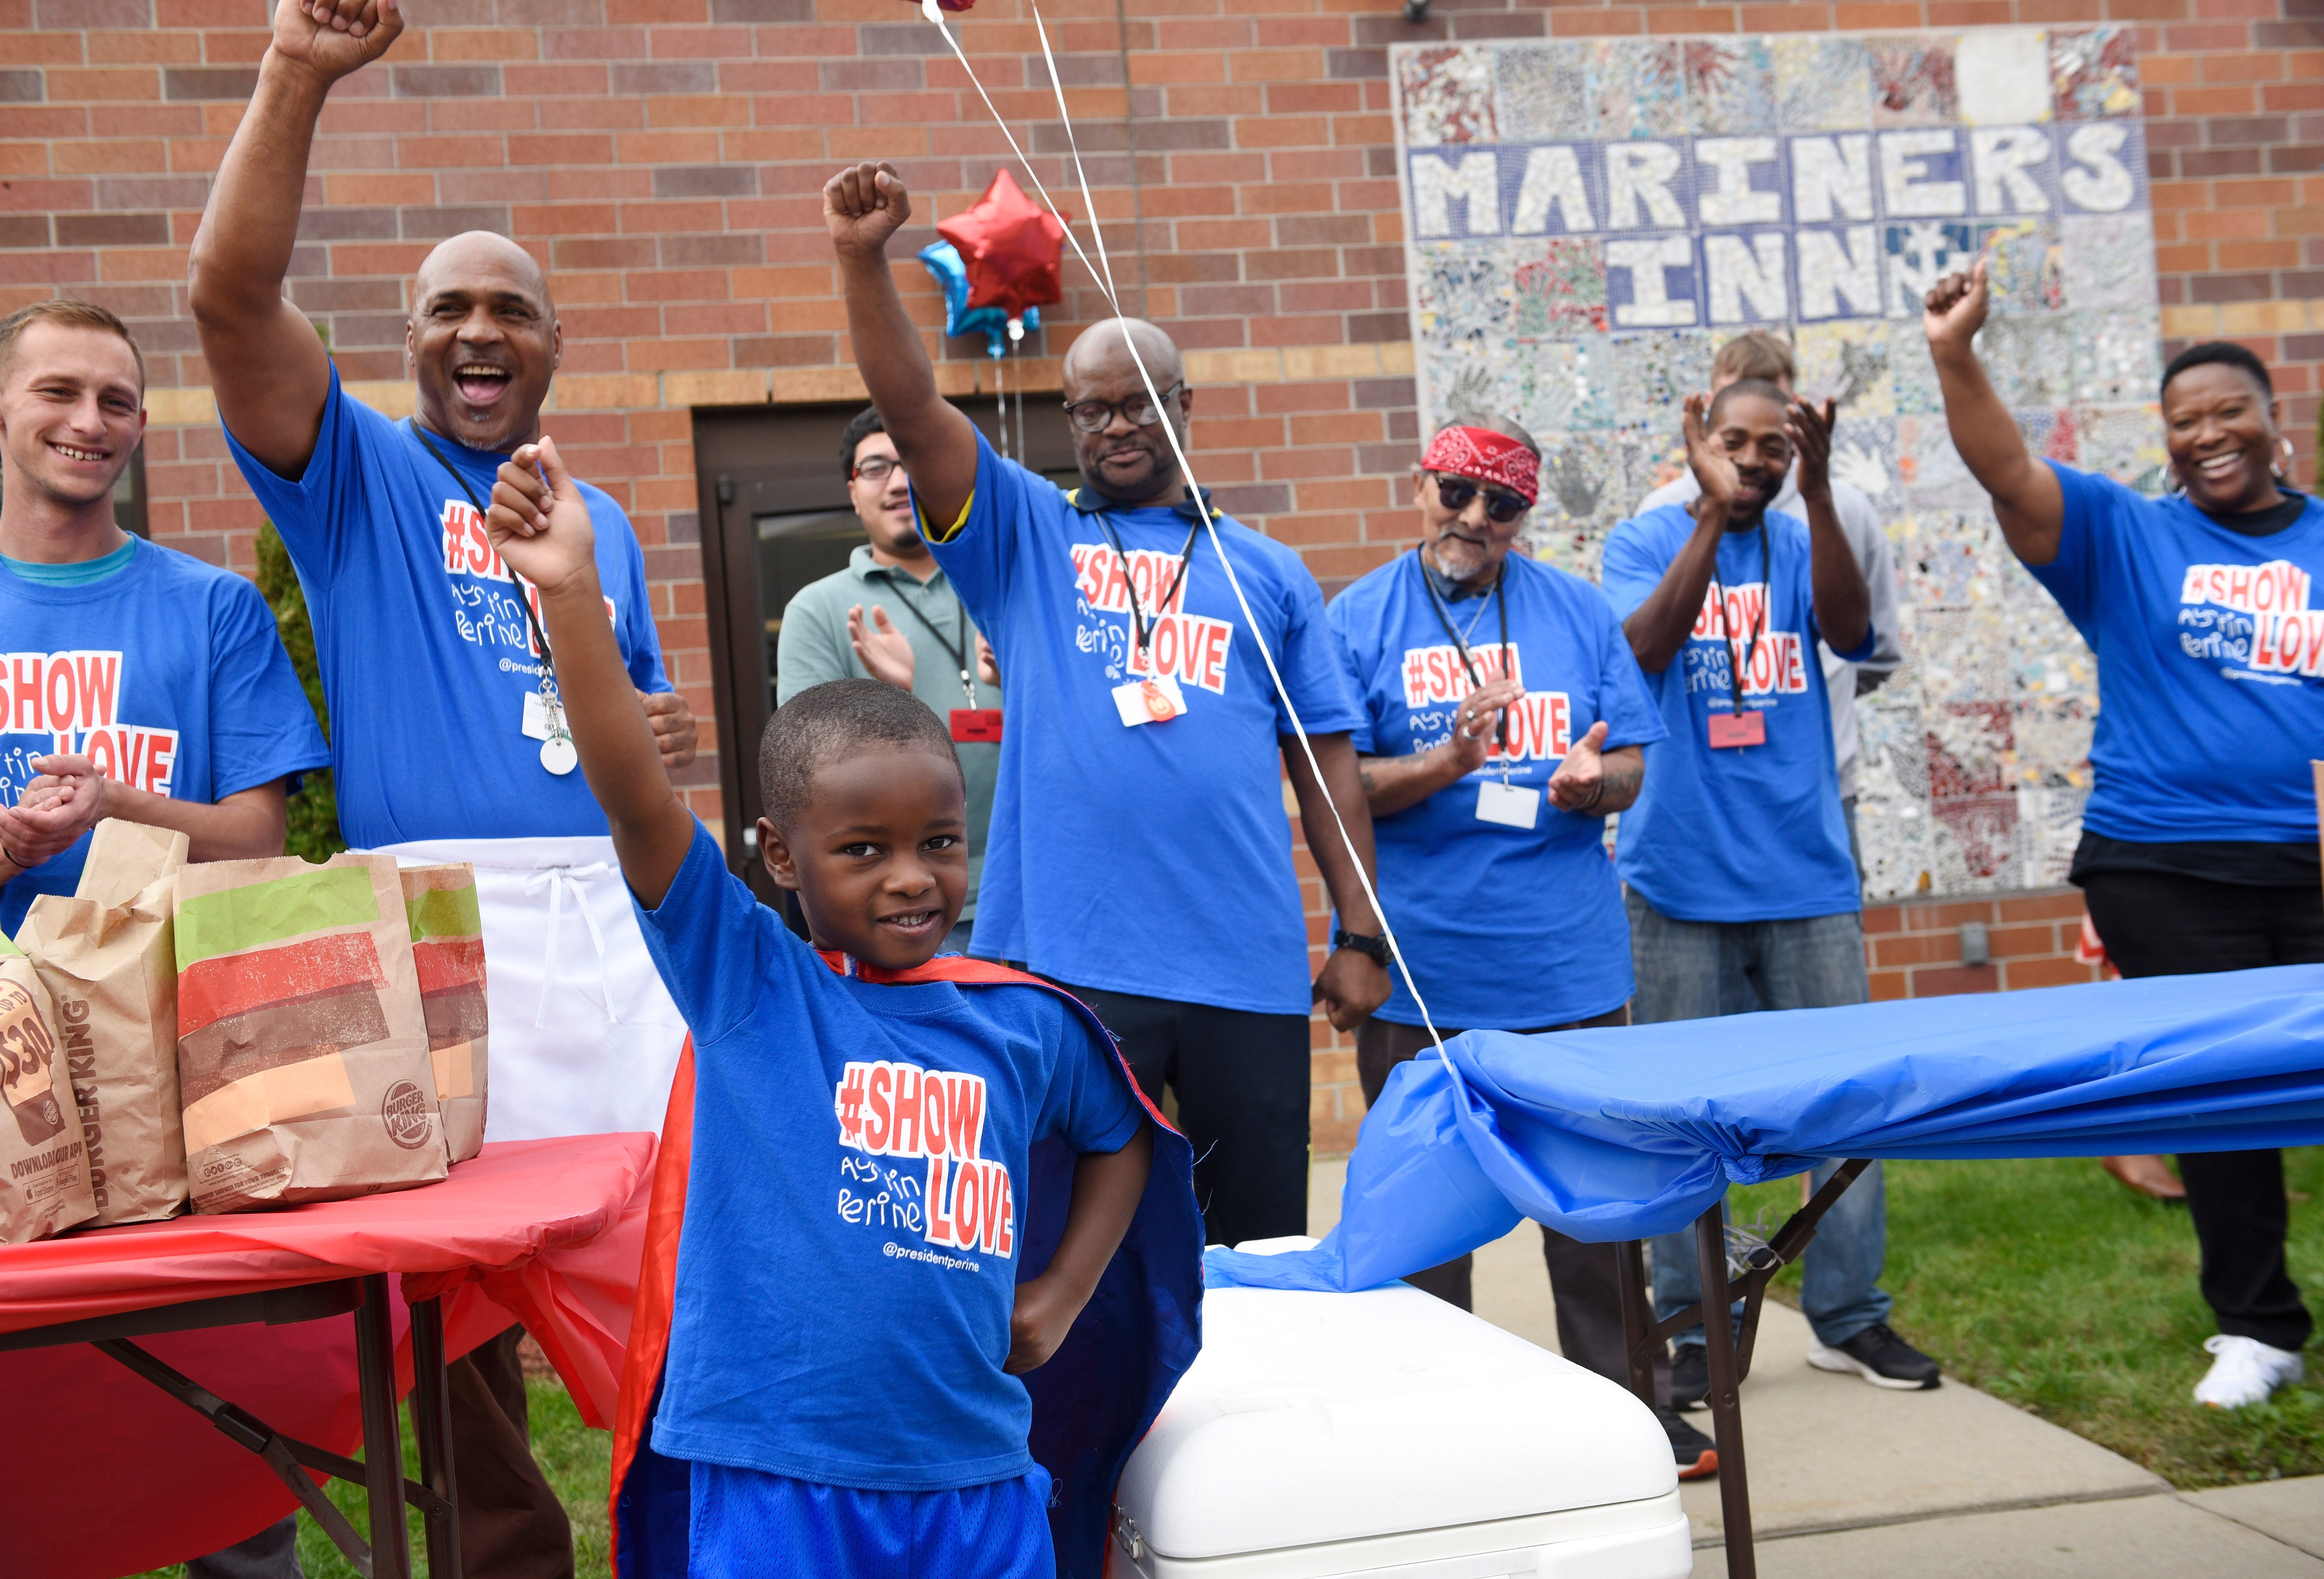 Austin Perine, 4, raises his hand to the applause from the crowd upon his arrival at Mariners Inn in Detroit.  Perine is a 4-year-old self-proclaimed superhero from Birmingham, Ala. His superpower is feeding as many homeless people as possible. Austin feeds the homeless on the streets and reminds them to show love to someone else.